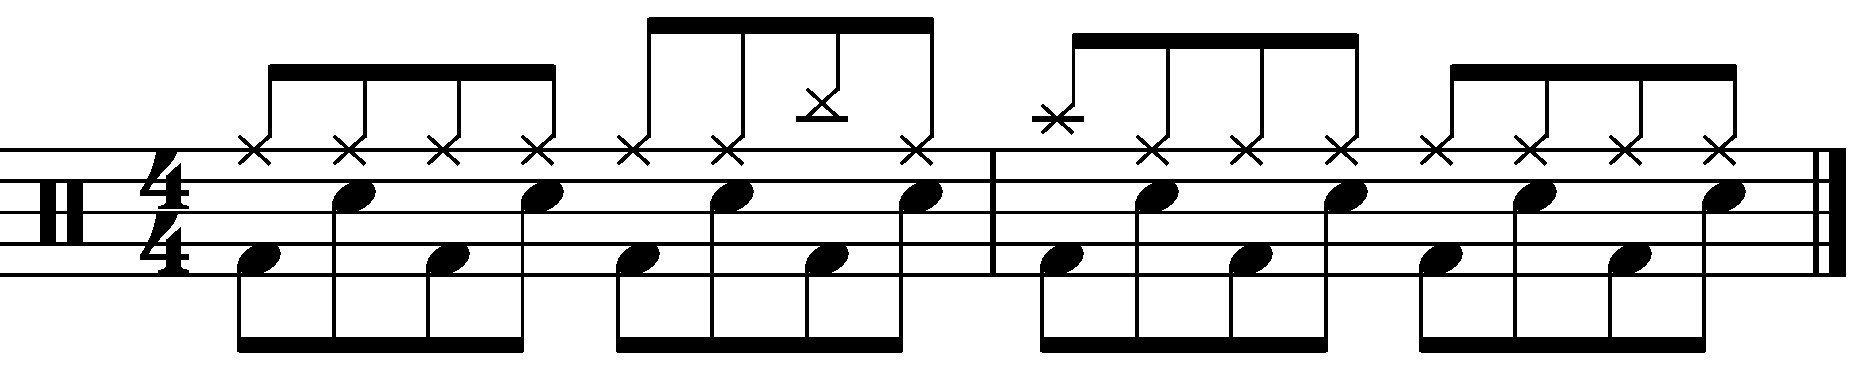 The concept applied to a half time groove with quarter note right hands